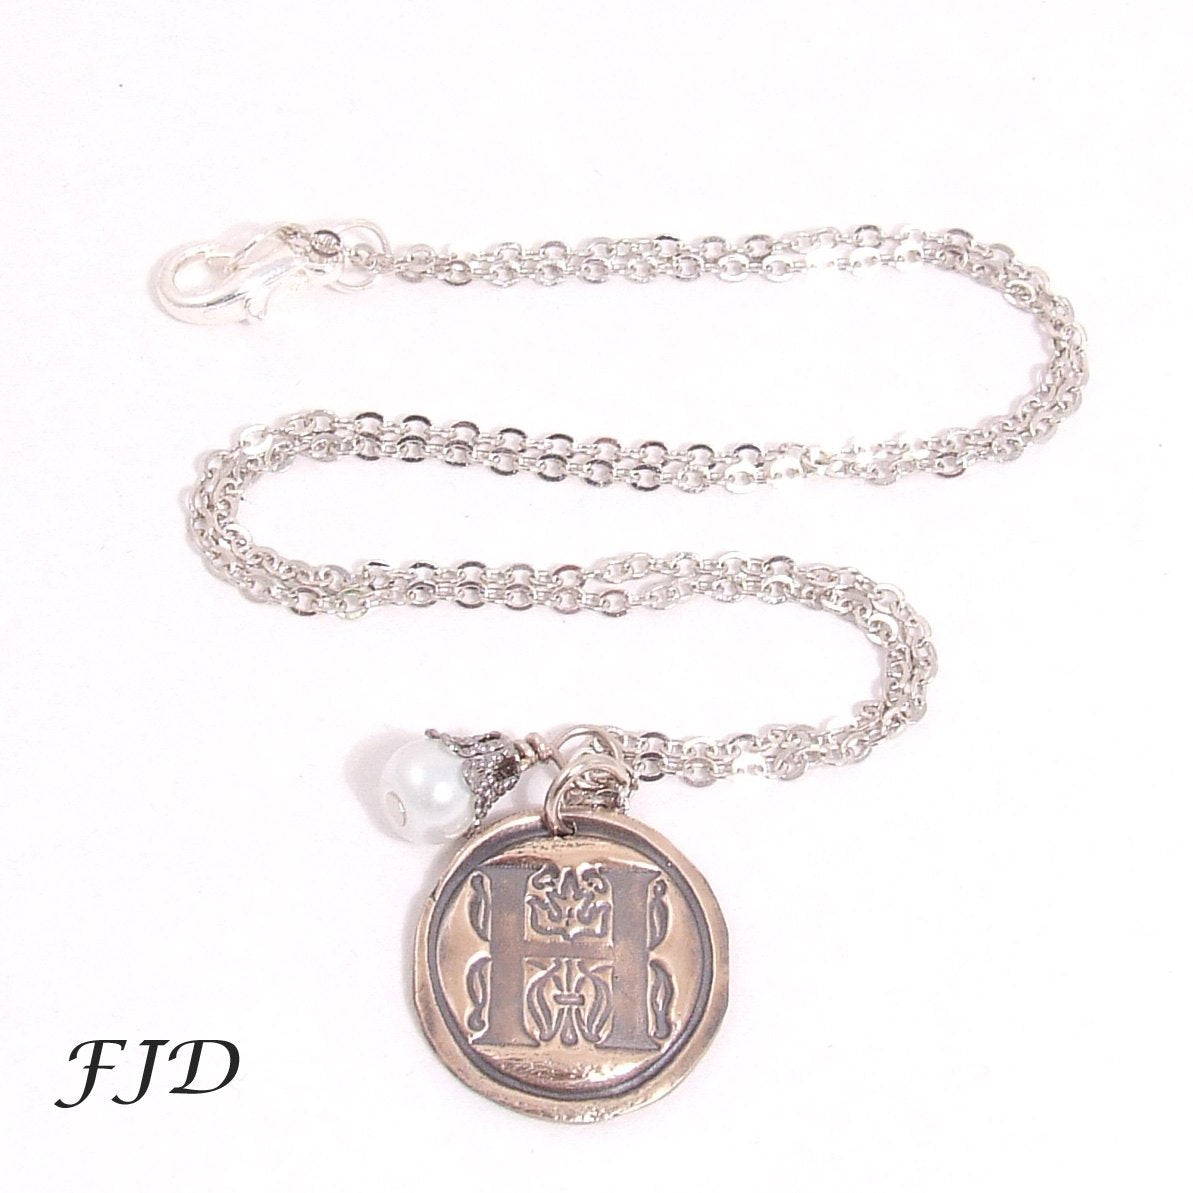 Wax Seal Hand-Stamped Bronze Initial Necklace